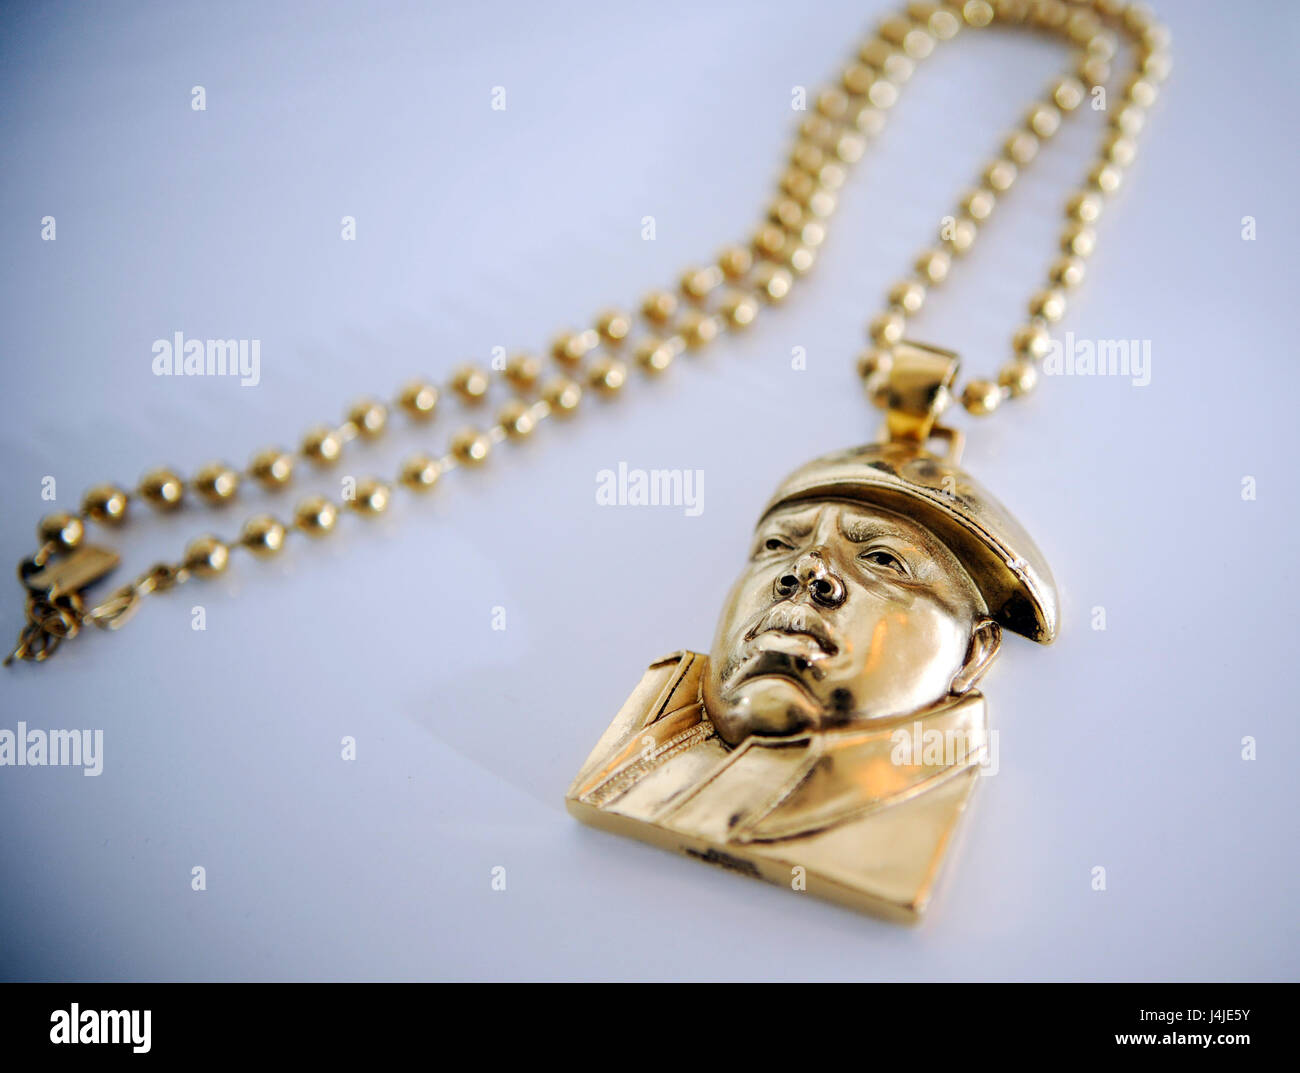 Rapper The Notorious B.I.G. aka Biggie Smalls gold chain face on set of Quincy Brown #|#Stay Awhile#|# music video in Los Angeles, California. Stock Photo